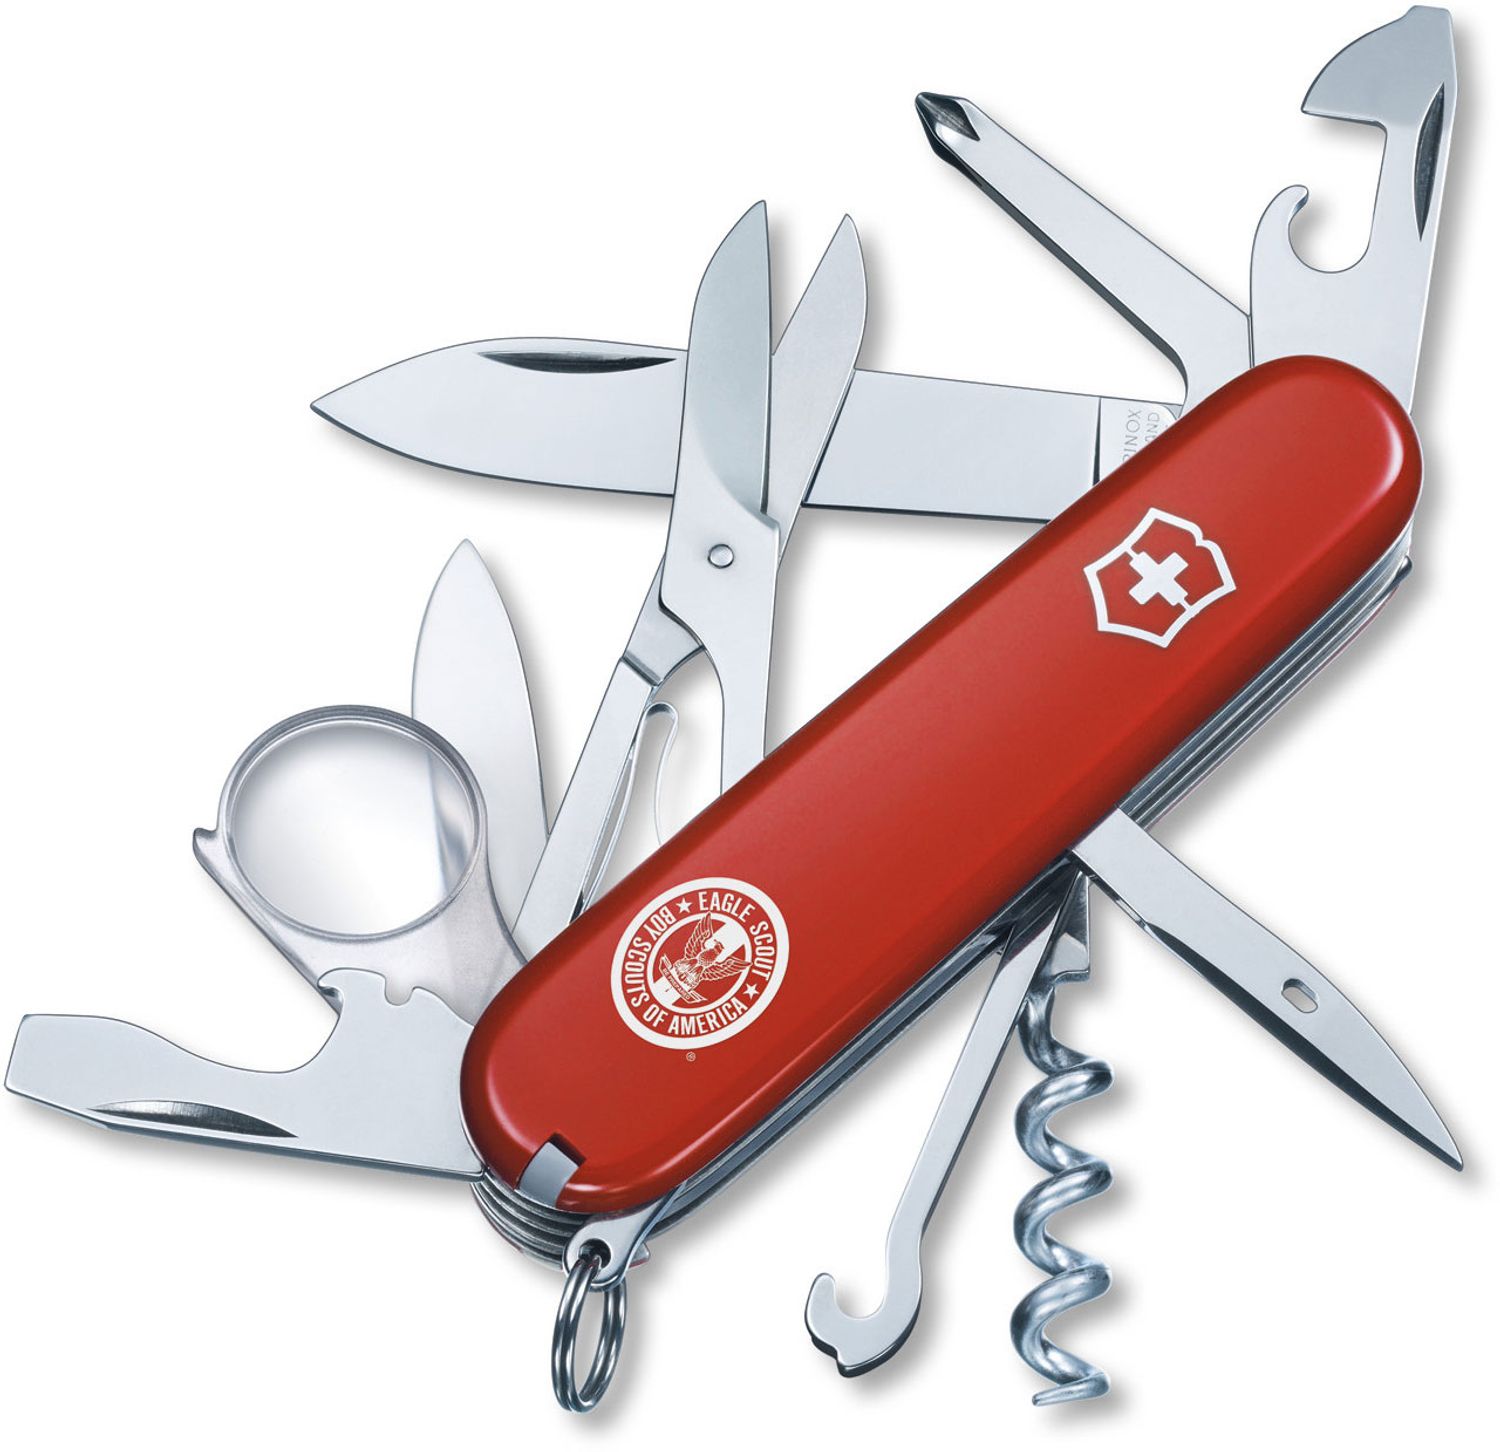 Swiss Army Classic SD Eagle Scout Pocket Knife, 2 1/4 Blade - 7 Function  Pocket Multitool